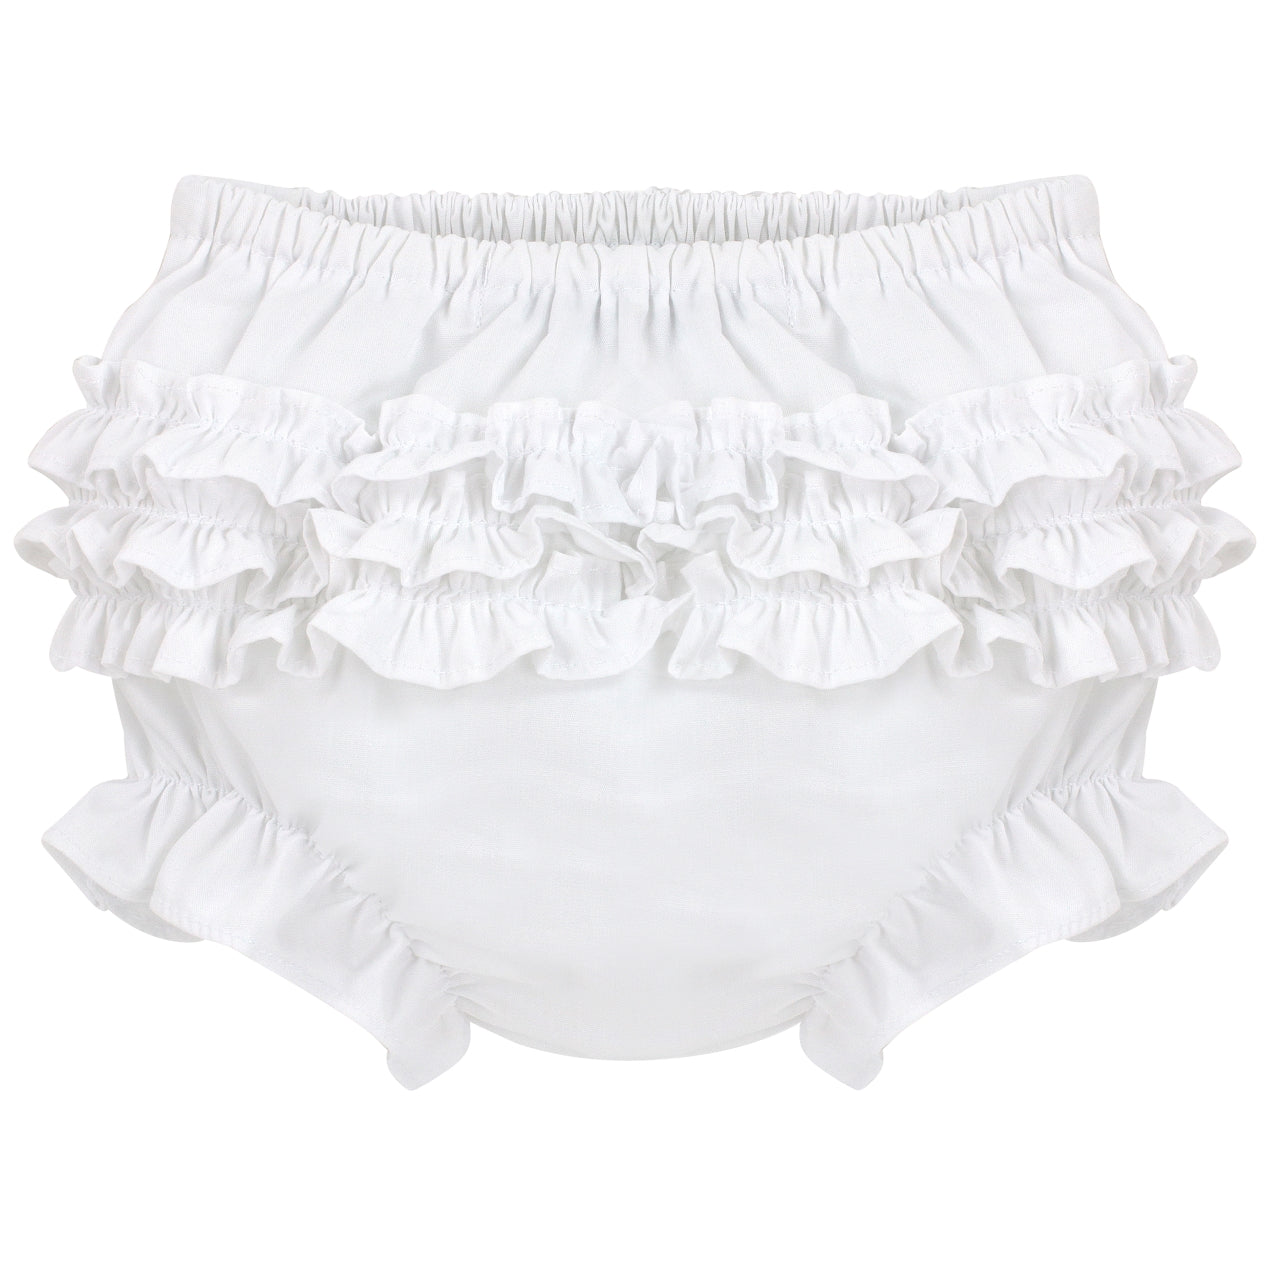 Wholesale White Bloomers with Ruffles Knitted Panty Diaper Cover - Imagewear